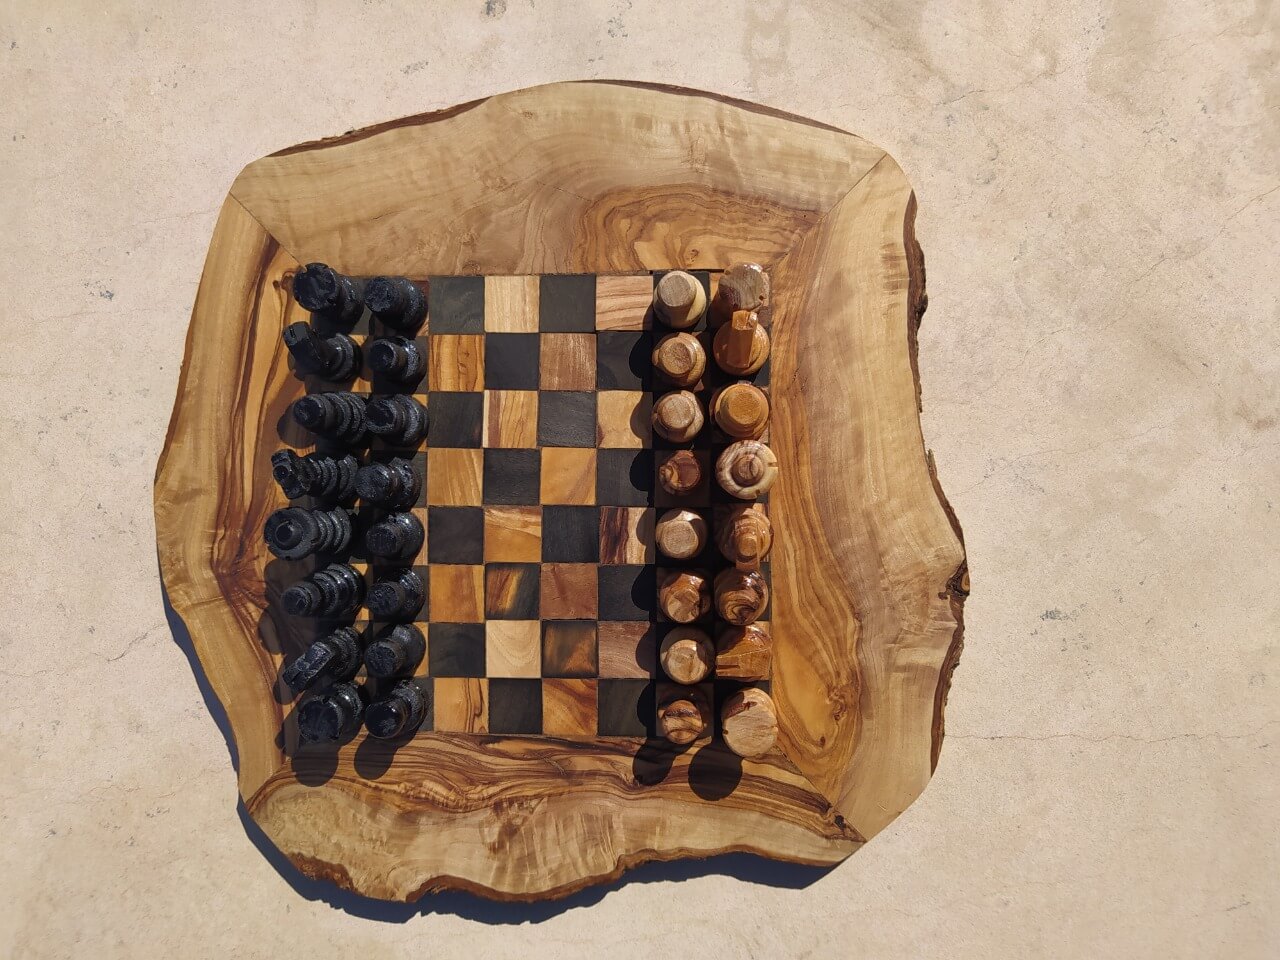 Small chess Boards